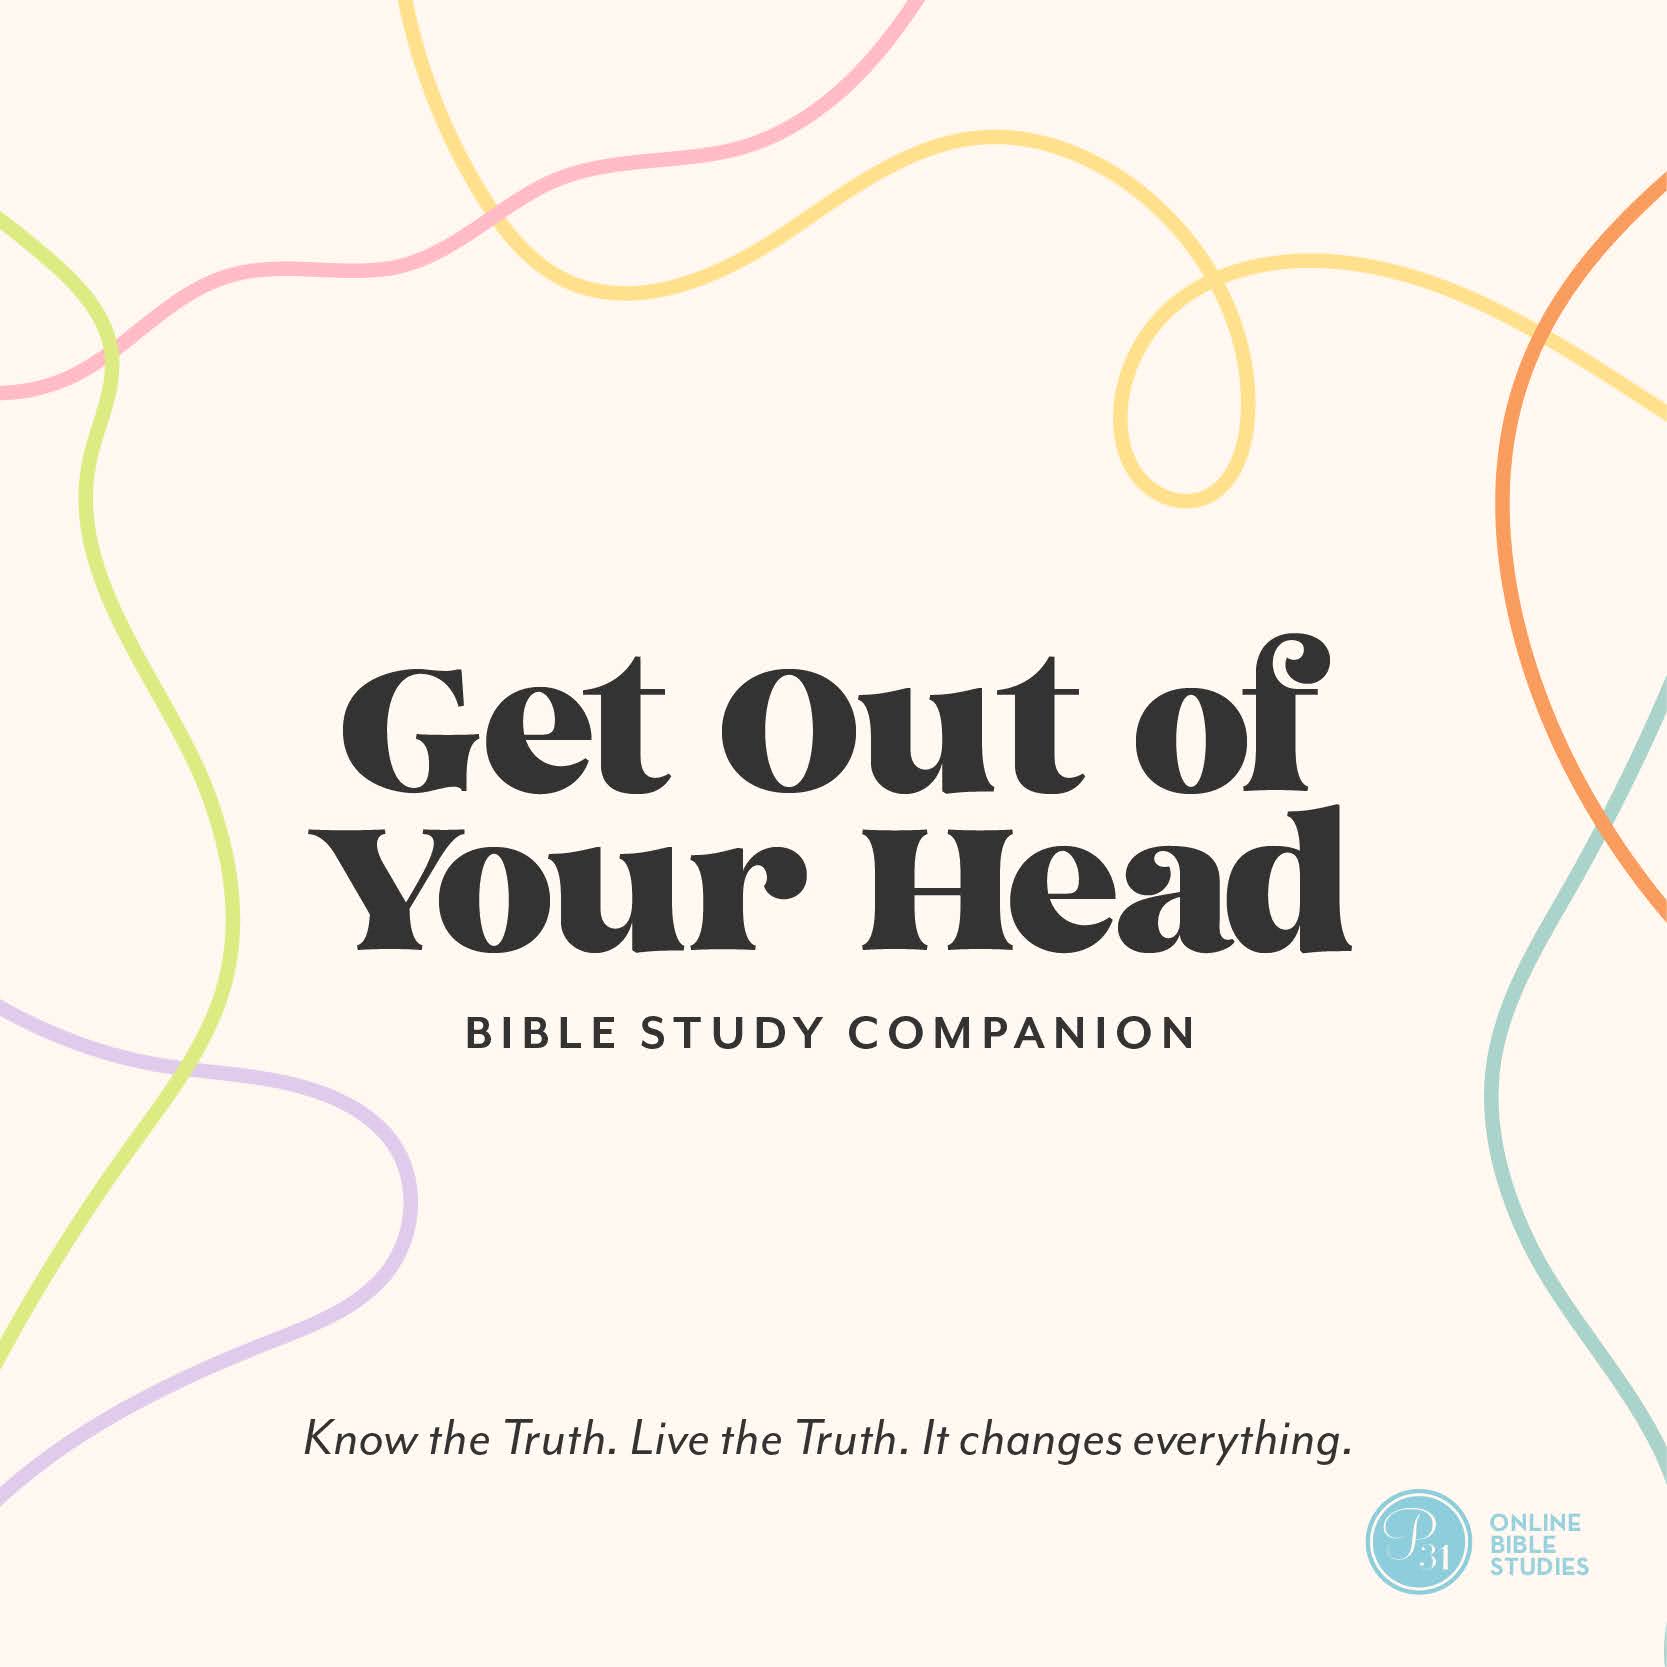 “Get Out of Your Head” by Jennie Allen | P31 OBS Study BSC